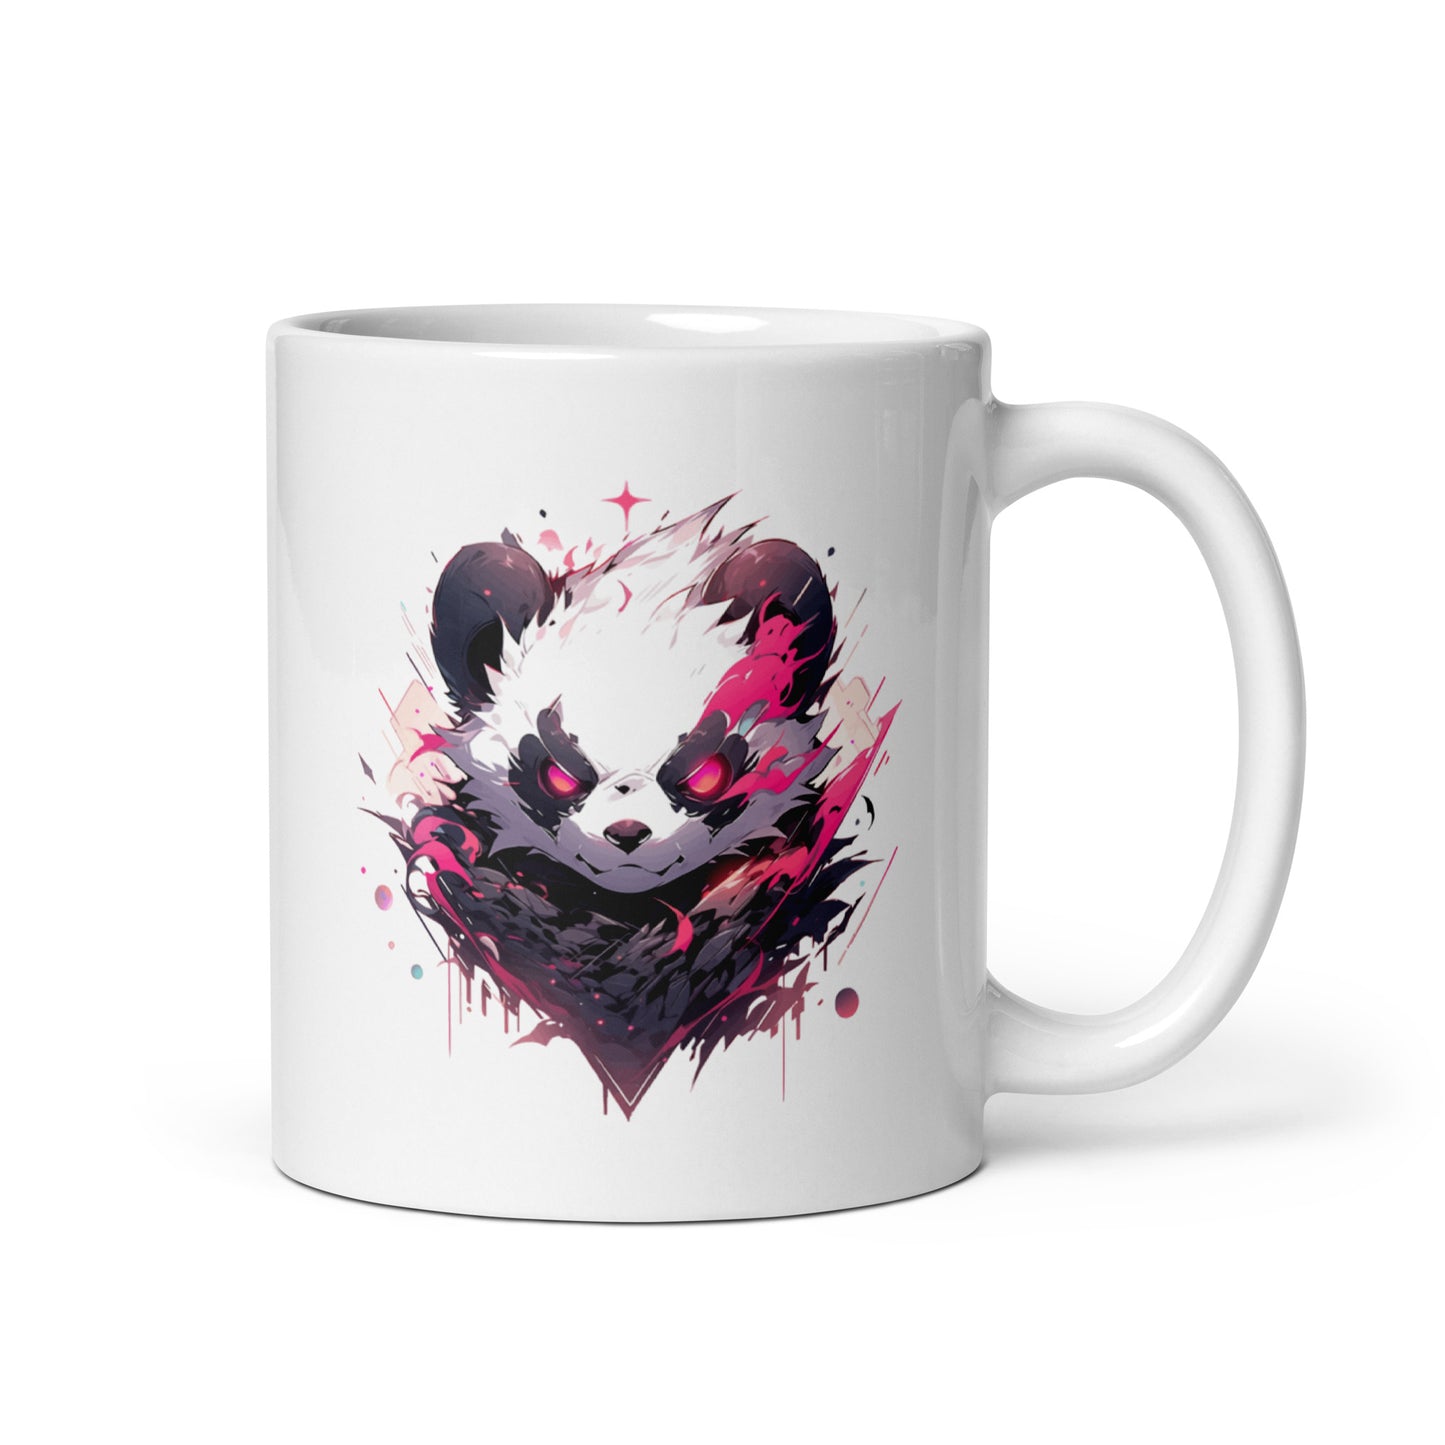 Black and white bear, Bamboo bear in jungle, Most angry panda in district, Red eyes animal wild - White glossy mug